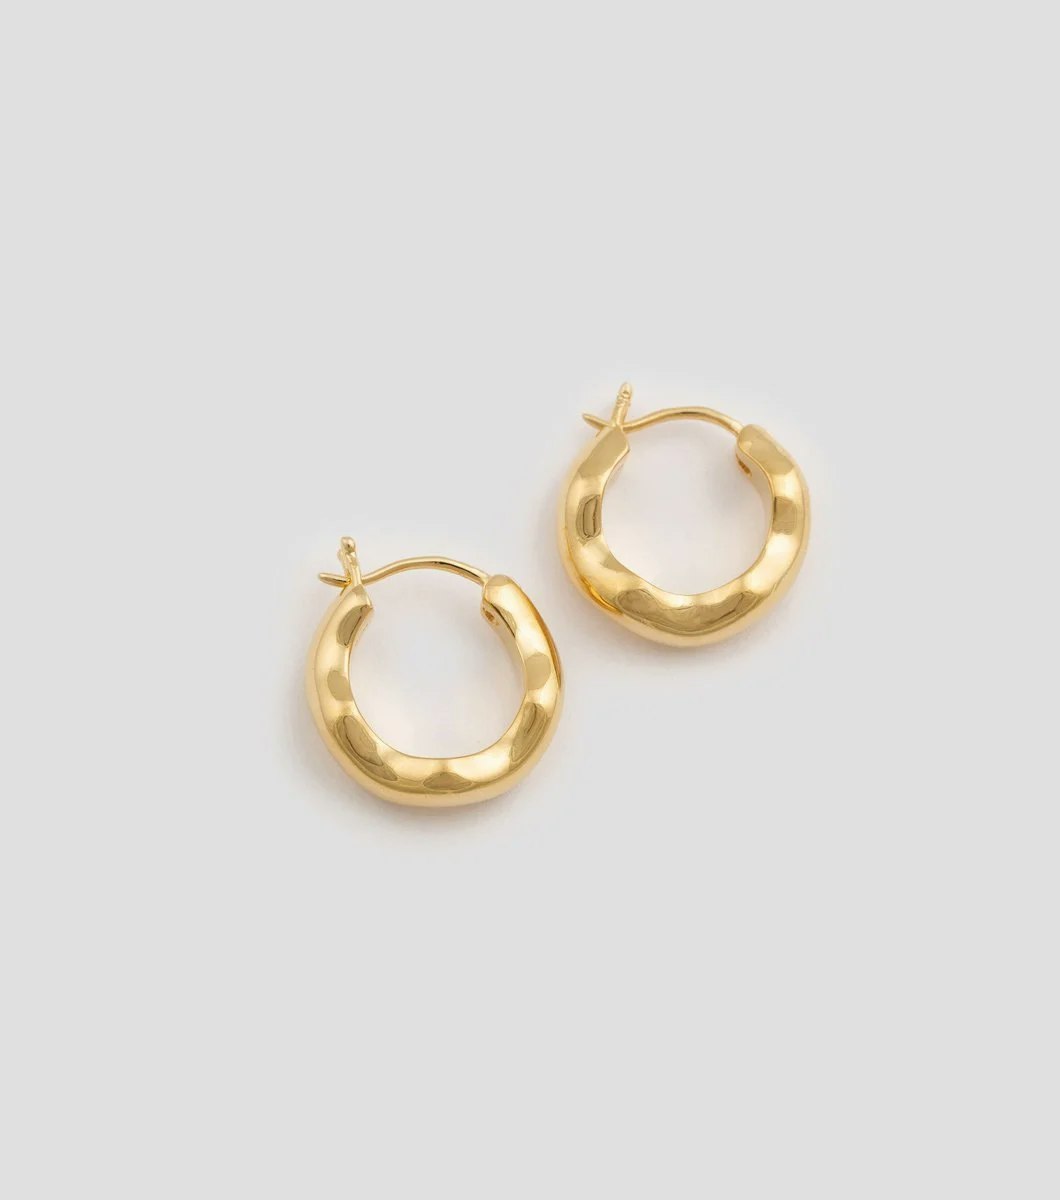 Bolded Wavy Earrings Shiny Gold Syster P